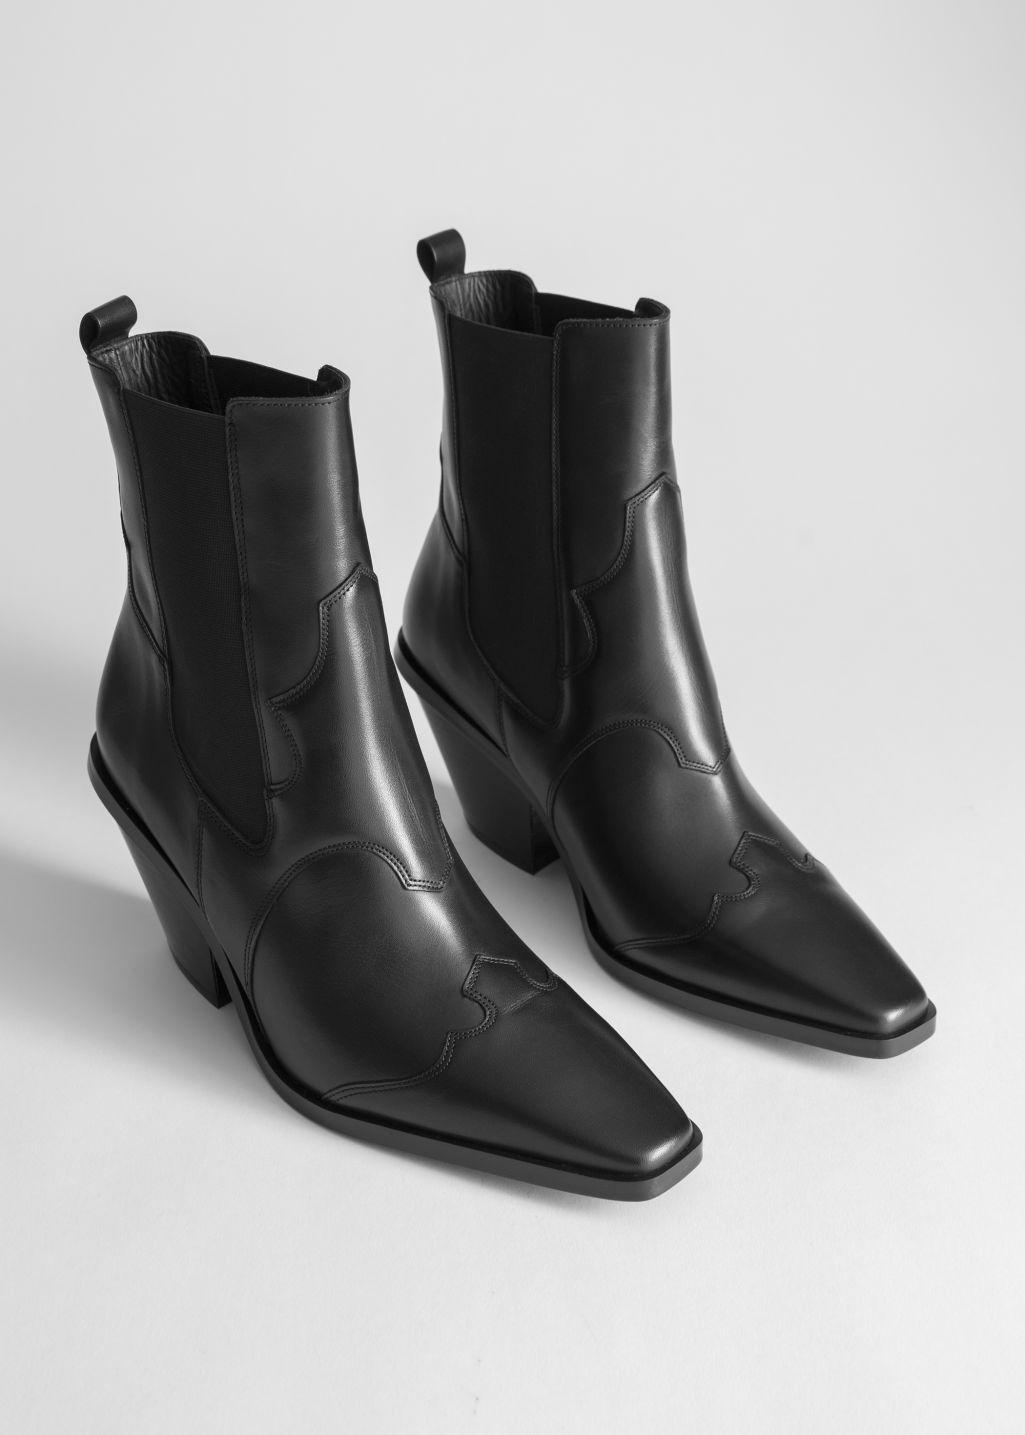 & Other Stories Square Toe Leather Cowboy Boots in Black - Lyst